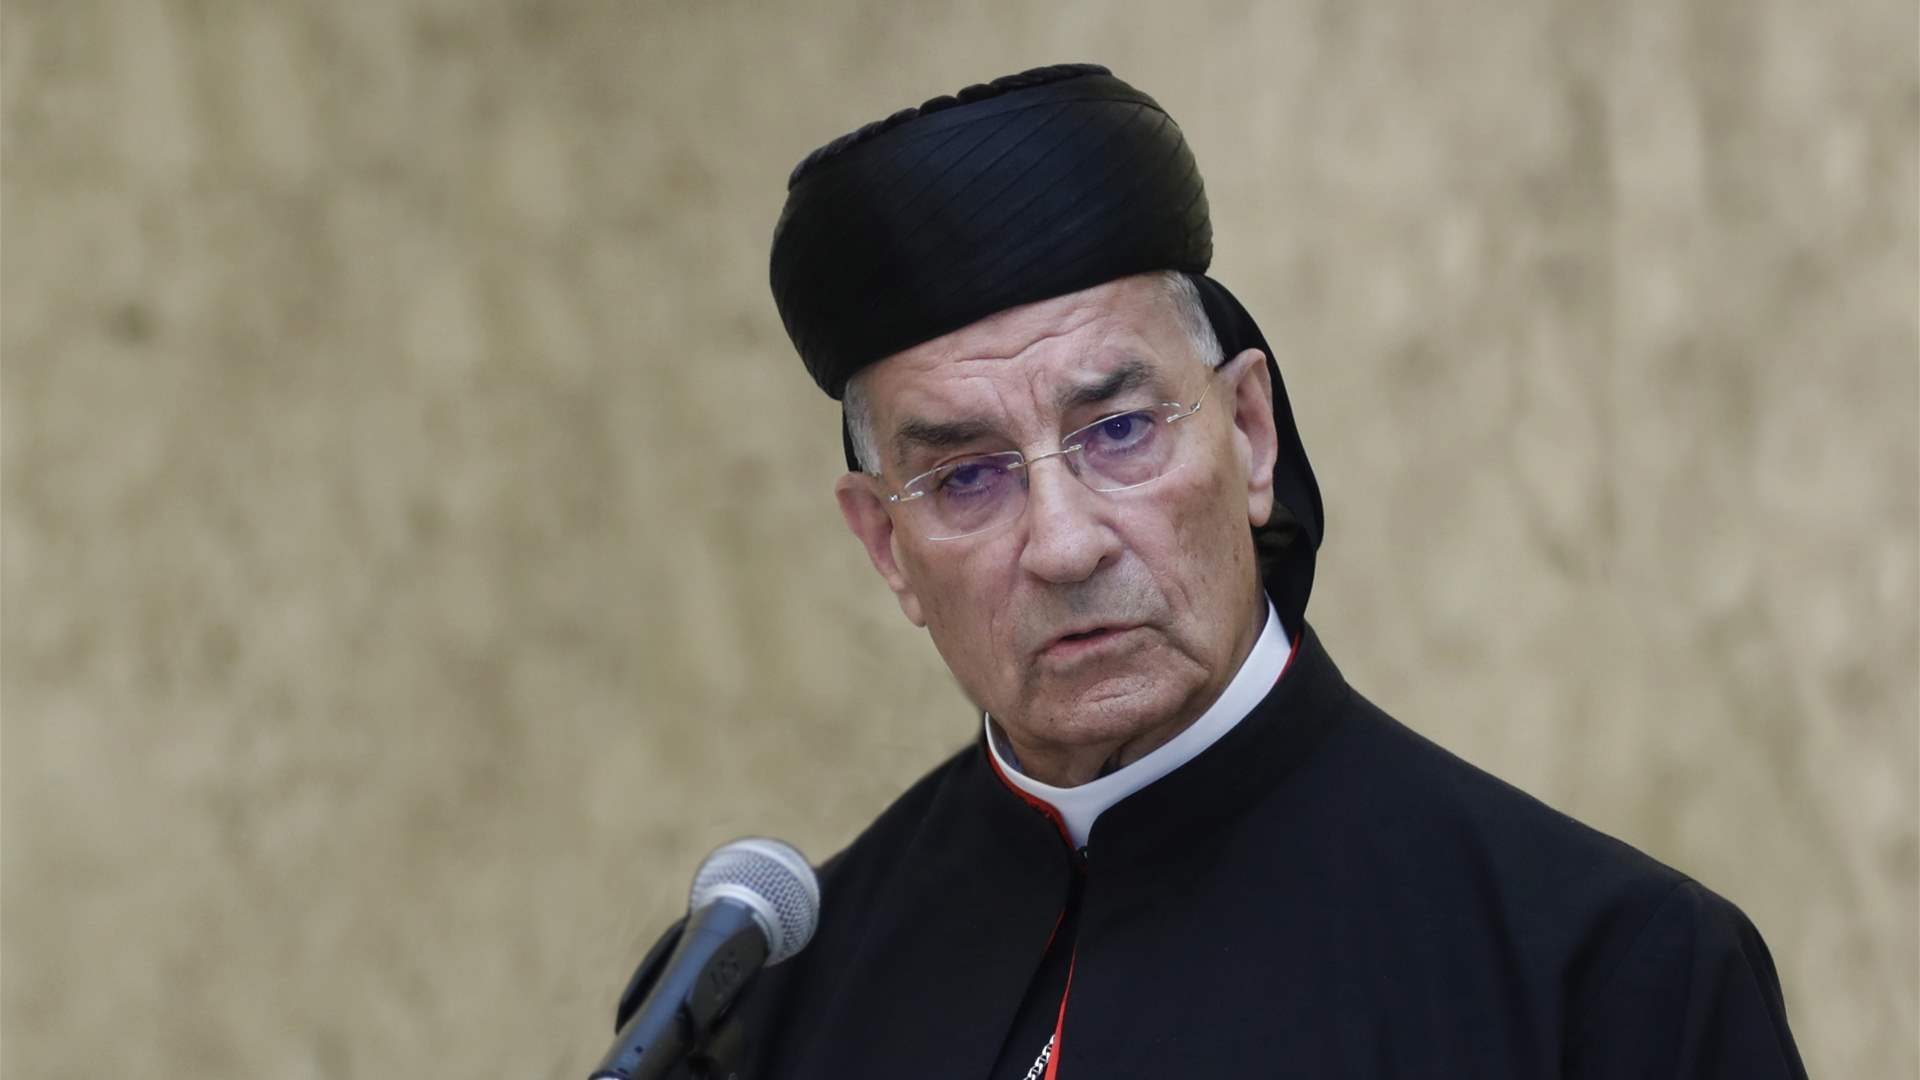 Maronite Patriarch al-Rahi urges MPs to attend possible dialogue called for by Berri amid presidential vacuum